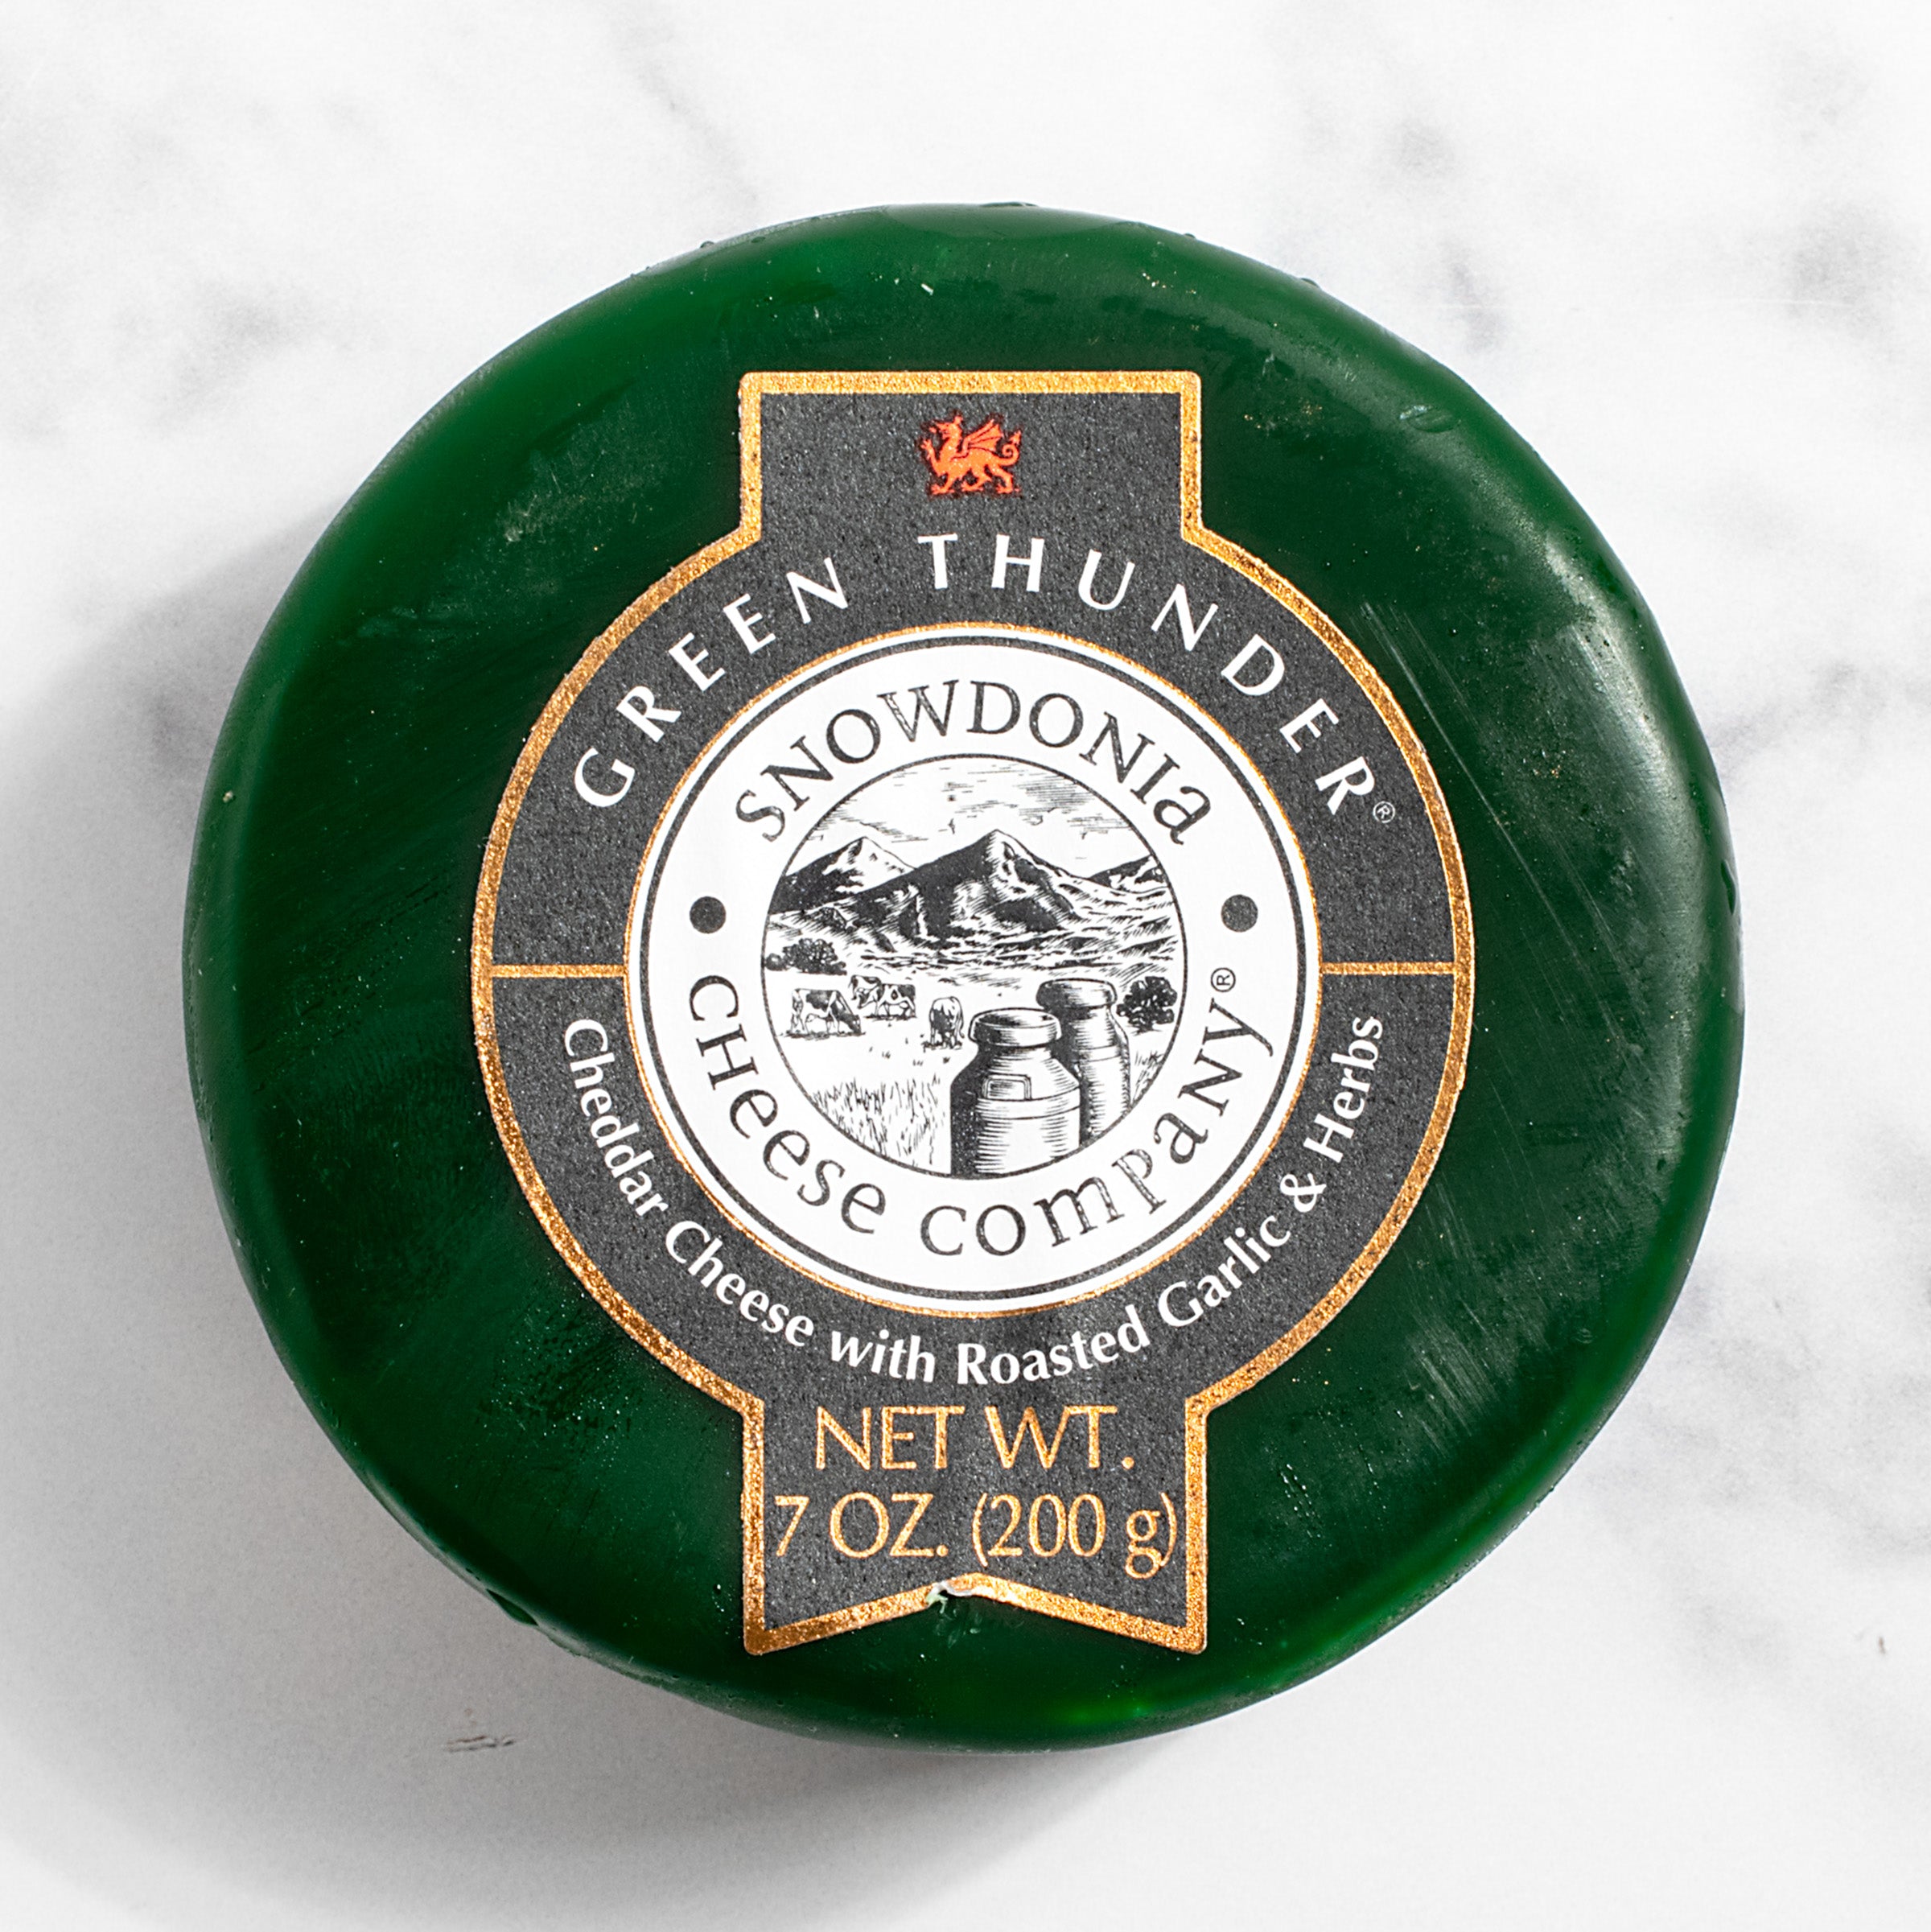 Green Thunder Welsh Truckle Cheese - Mature Cheddar with Garlic & Herbs